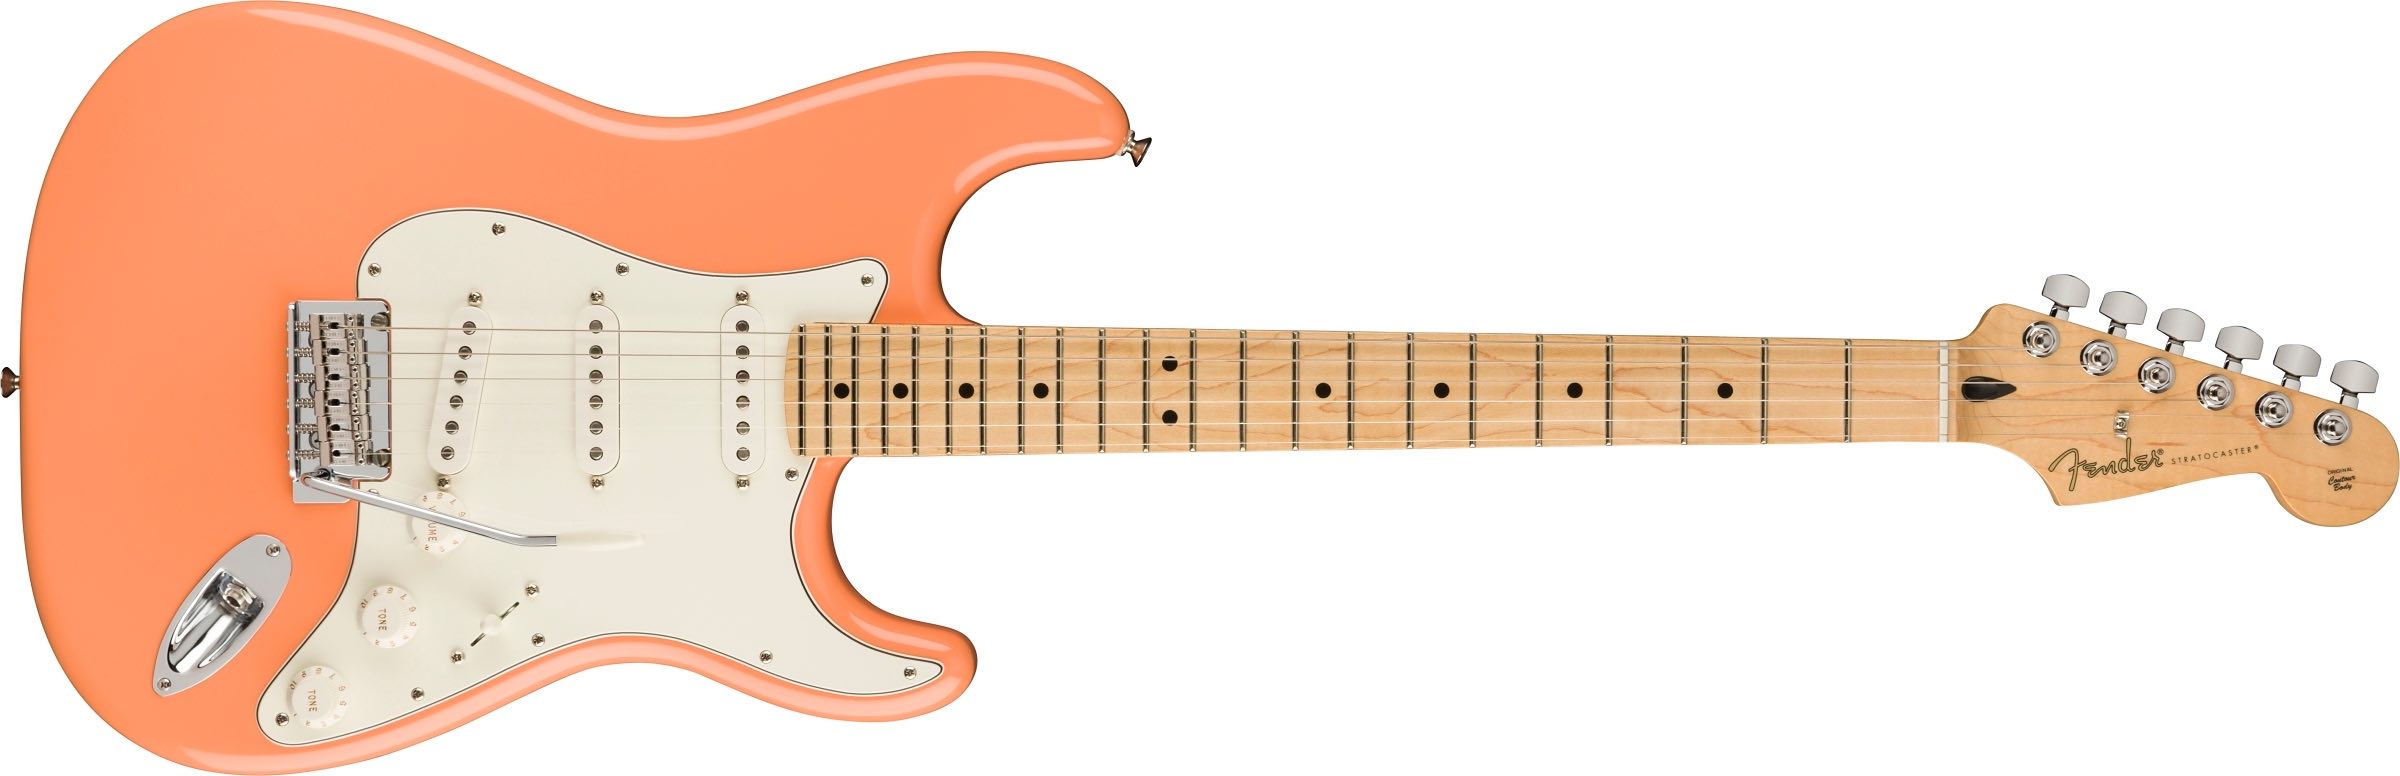 Fender Pacific Peach Player Series Stratocaster